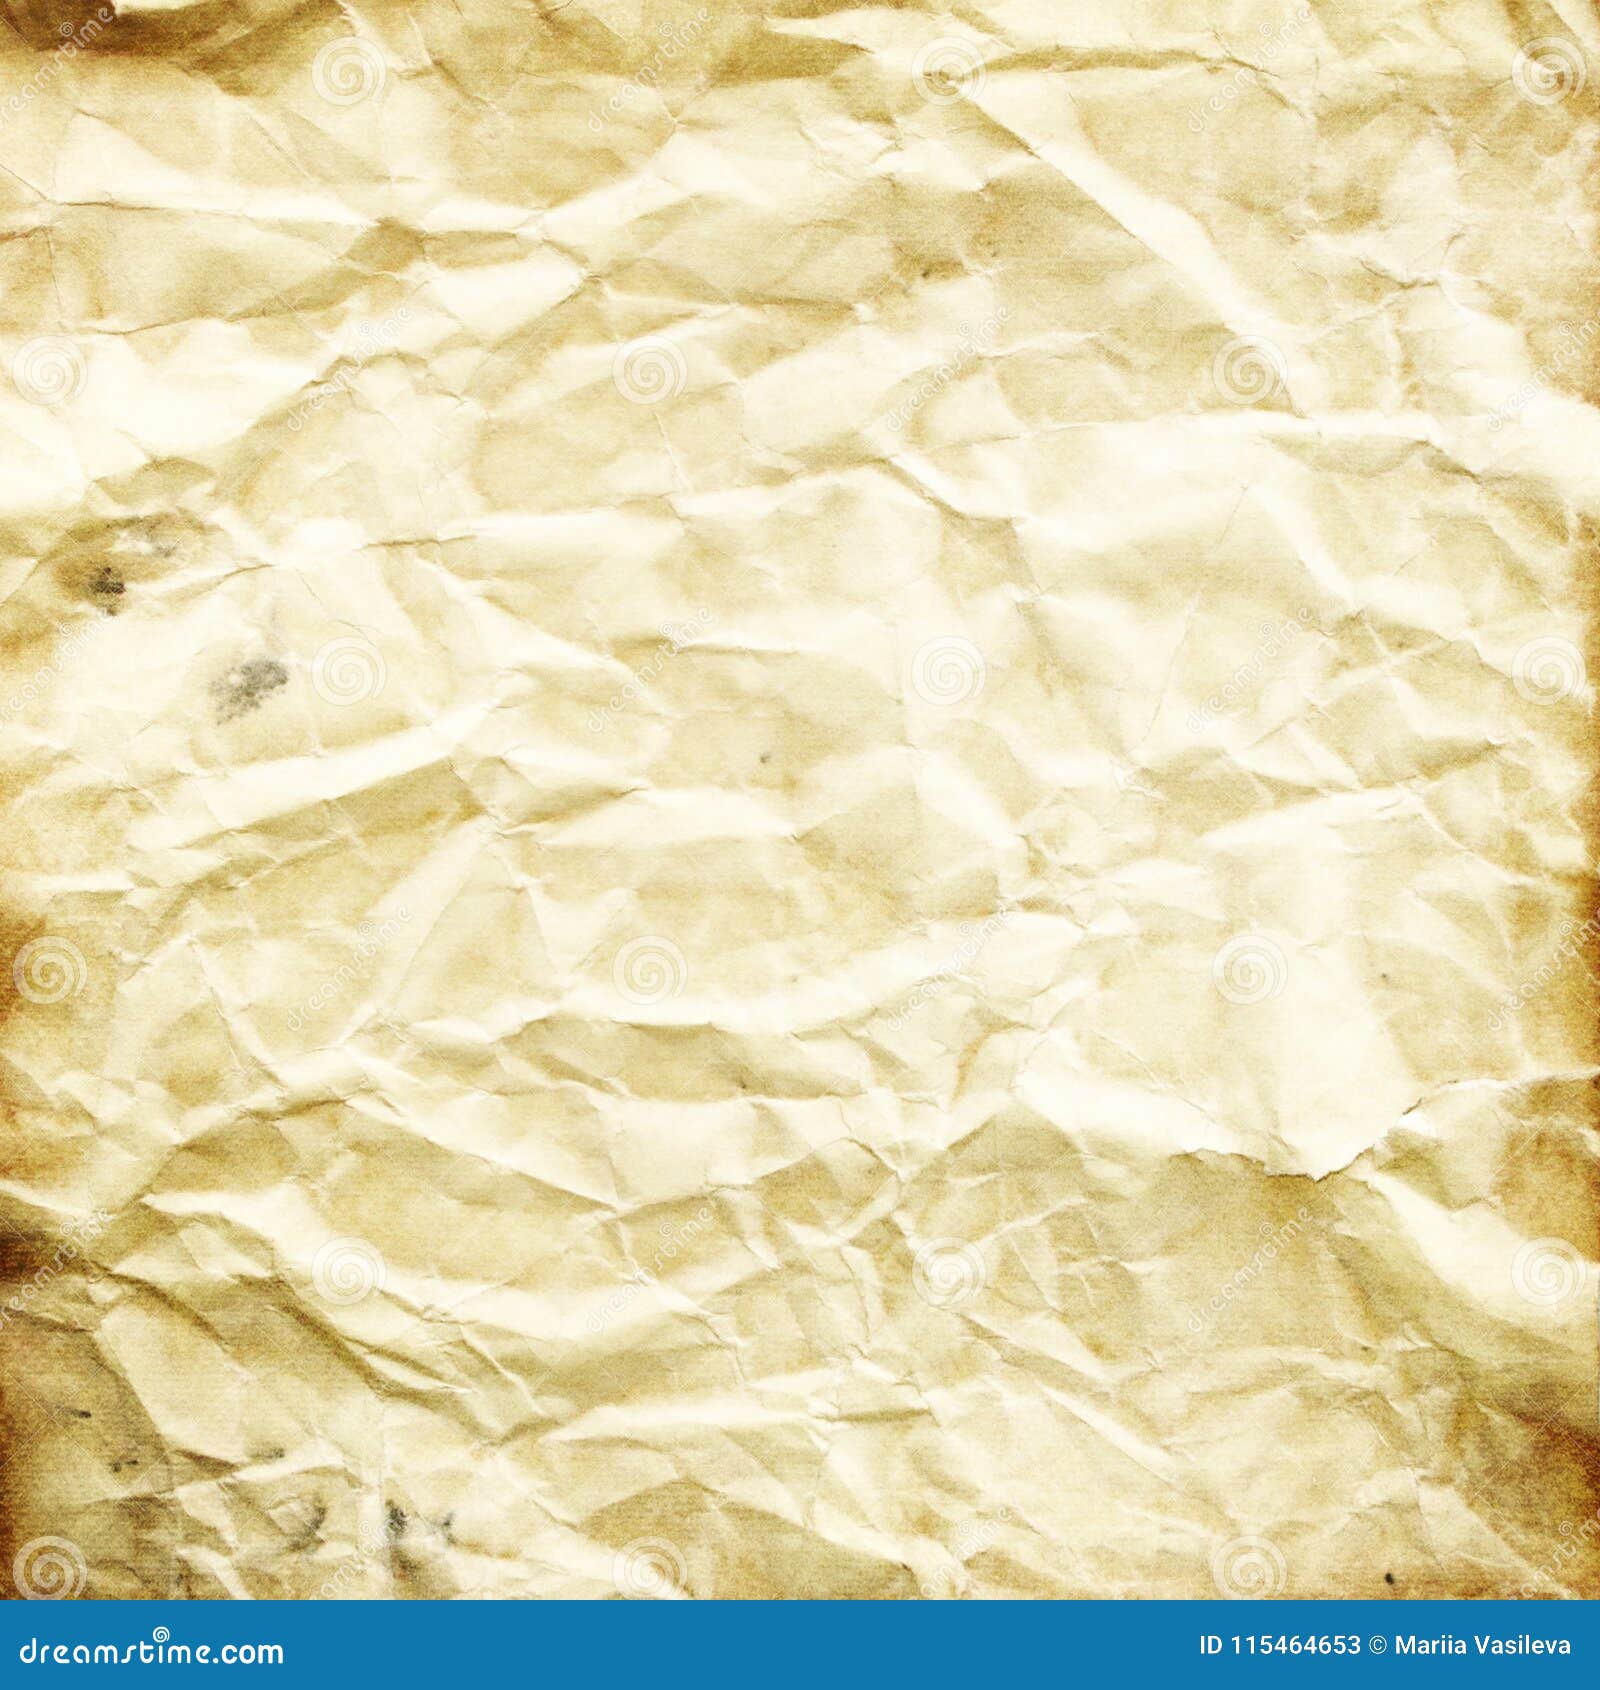 Texture of Old Crumpled Paper, Beige, Brown Grunge Background for Design  Stock Illustration - Illustration of parchment, blankcrumpled: 115464653